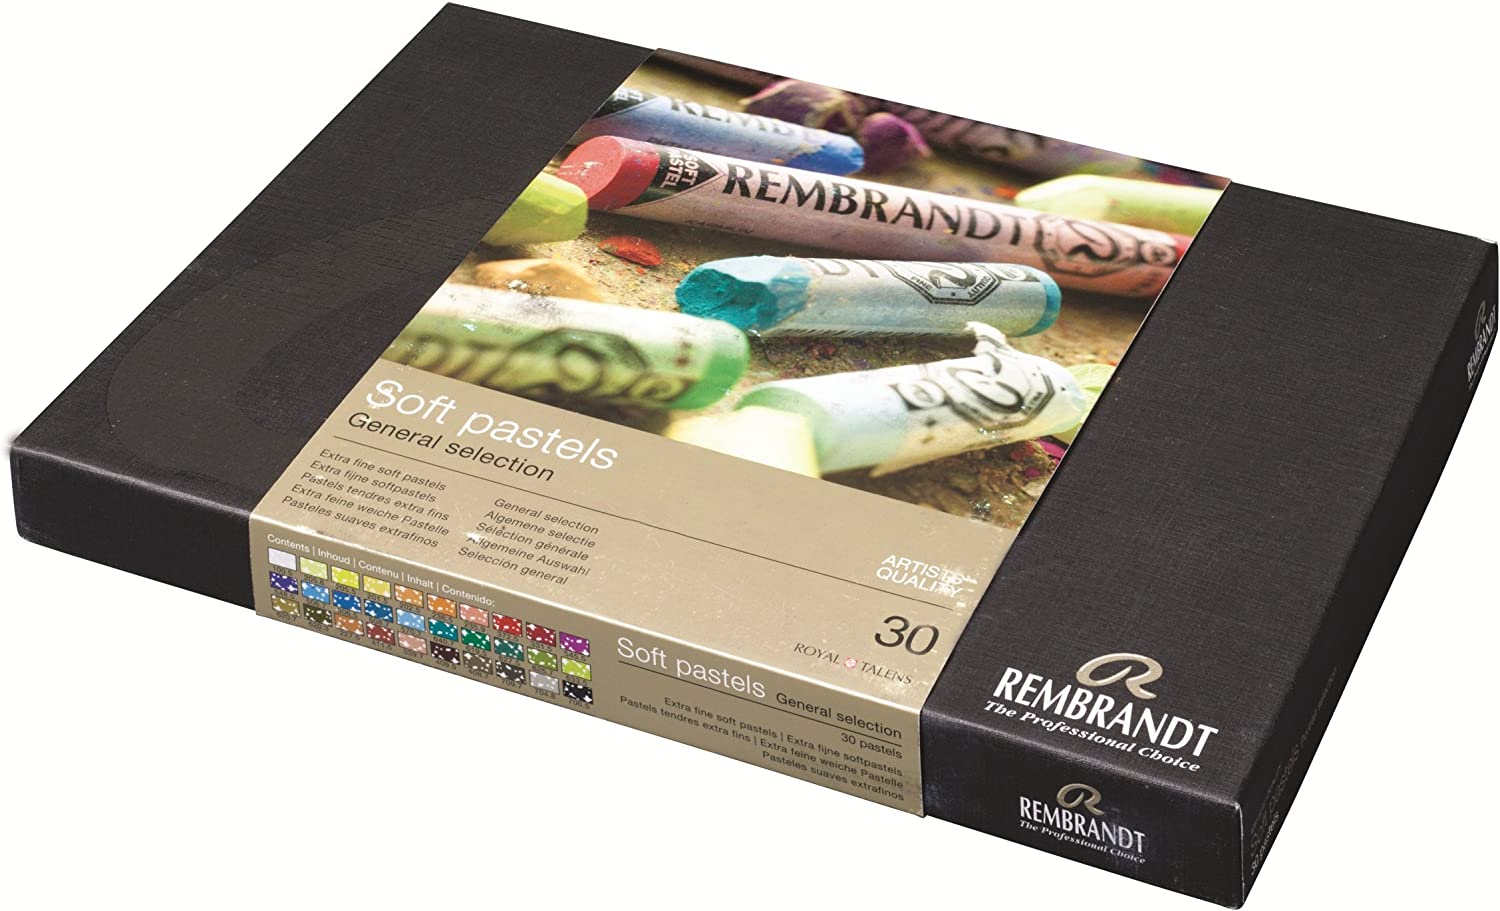 Closed box of Rembrandt Soft Pastels, a set of high-quality pastel sticks in various colors.